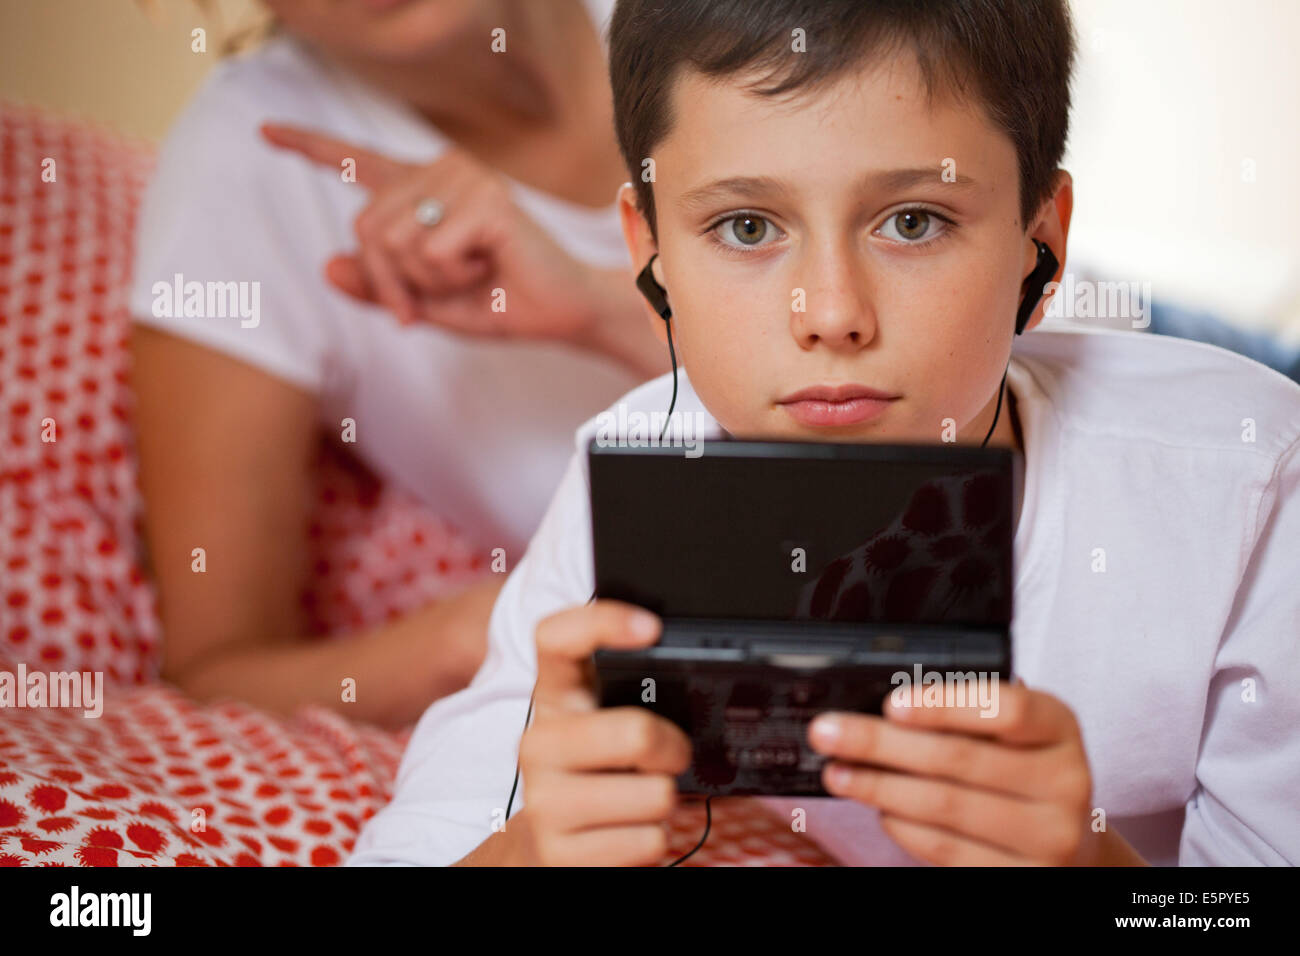 video games for 10 year old boy